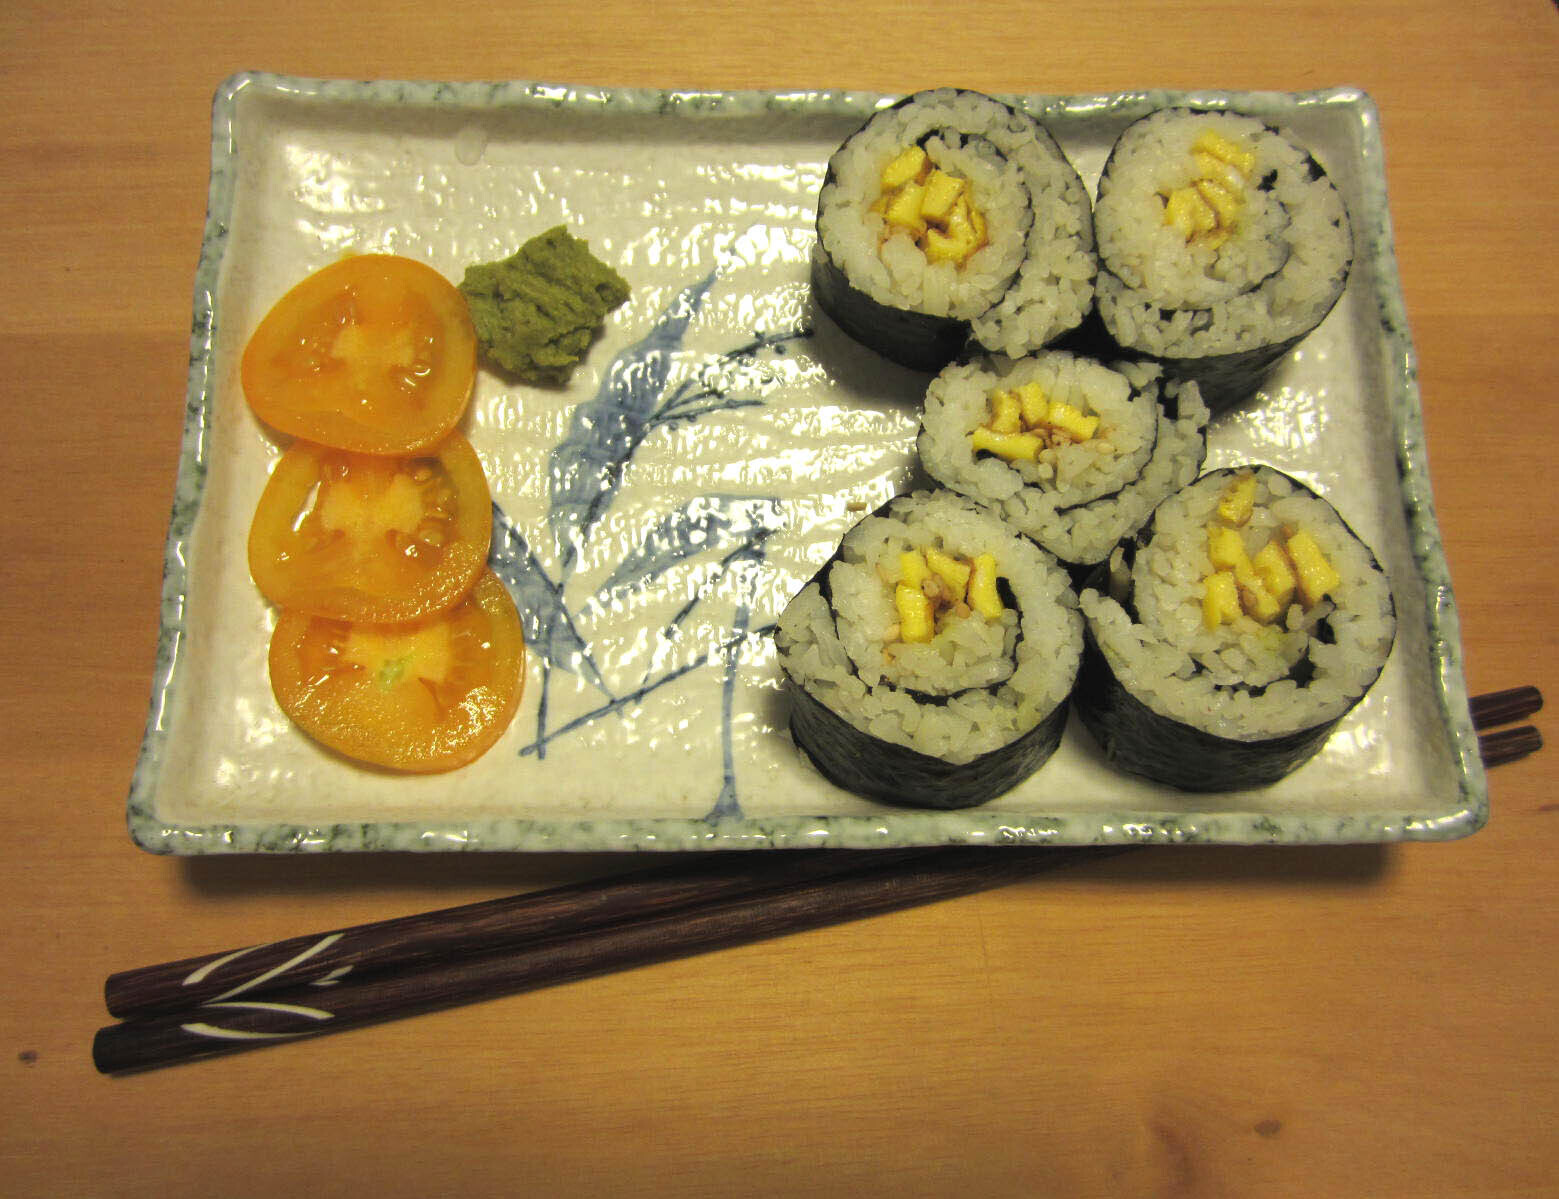 Egg sesame nori sushi rolls with a side of tomato and Wasabi